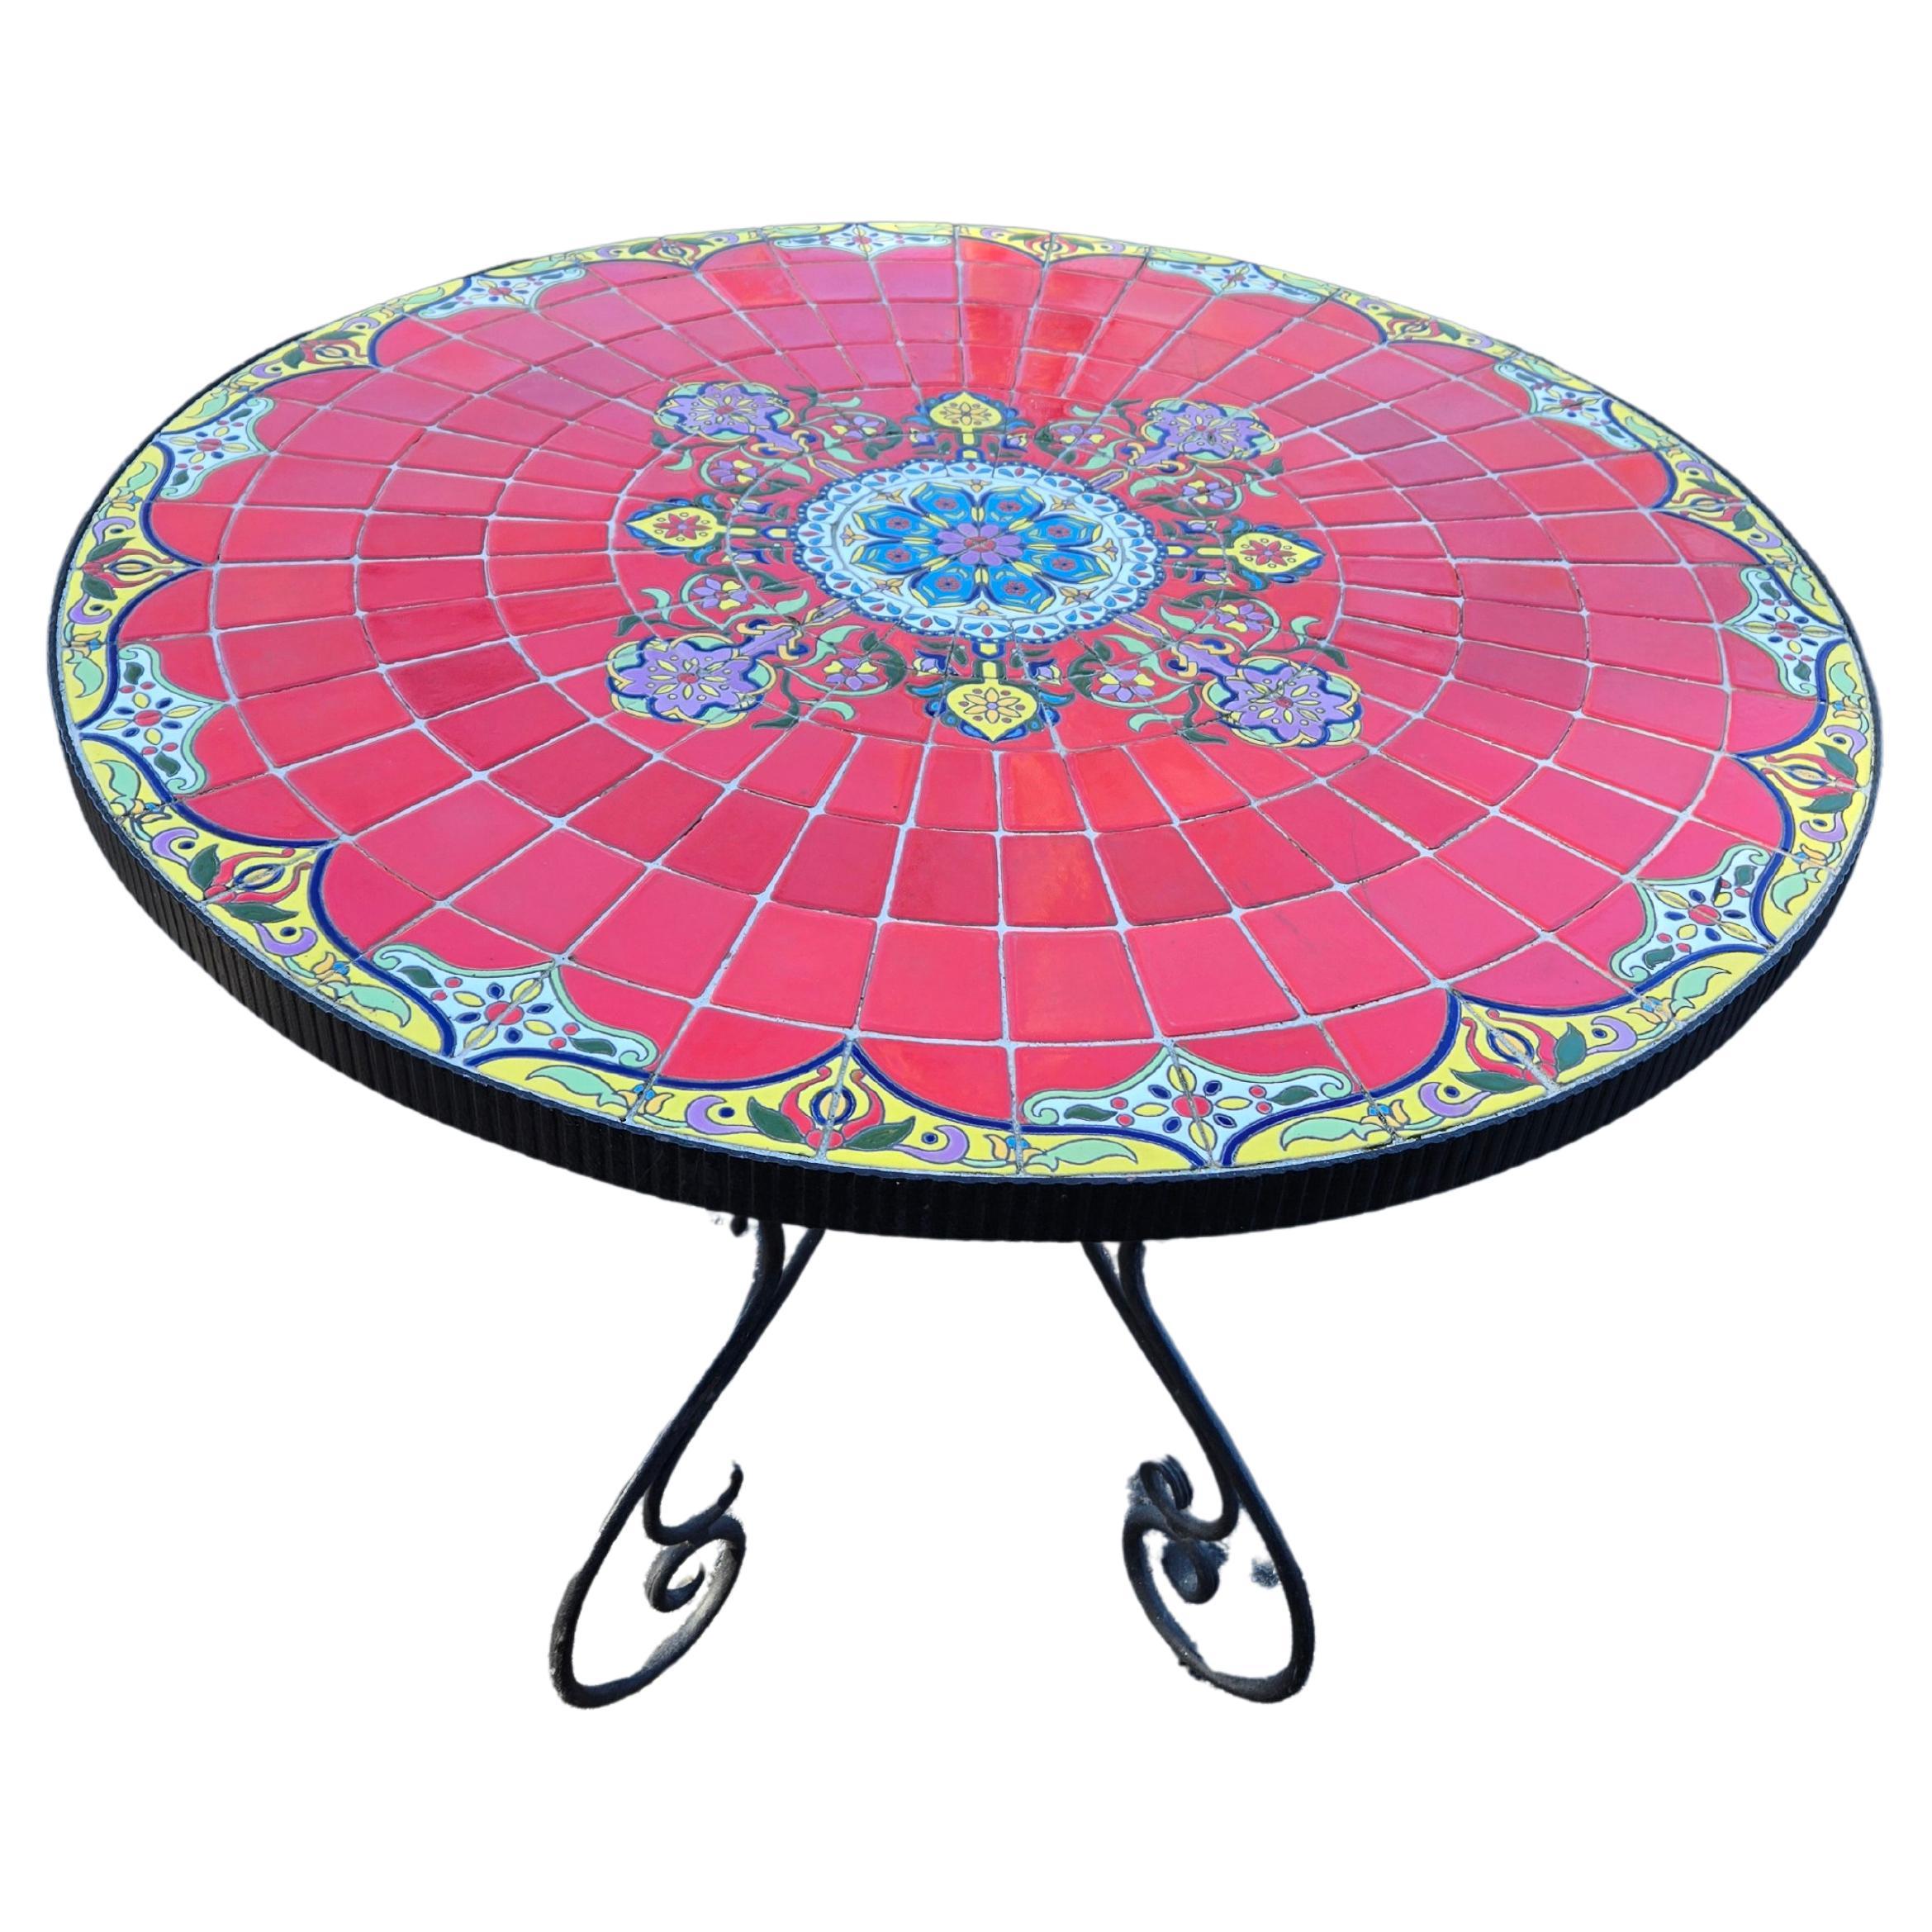 Mosaic Tile Table with Iron Base